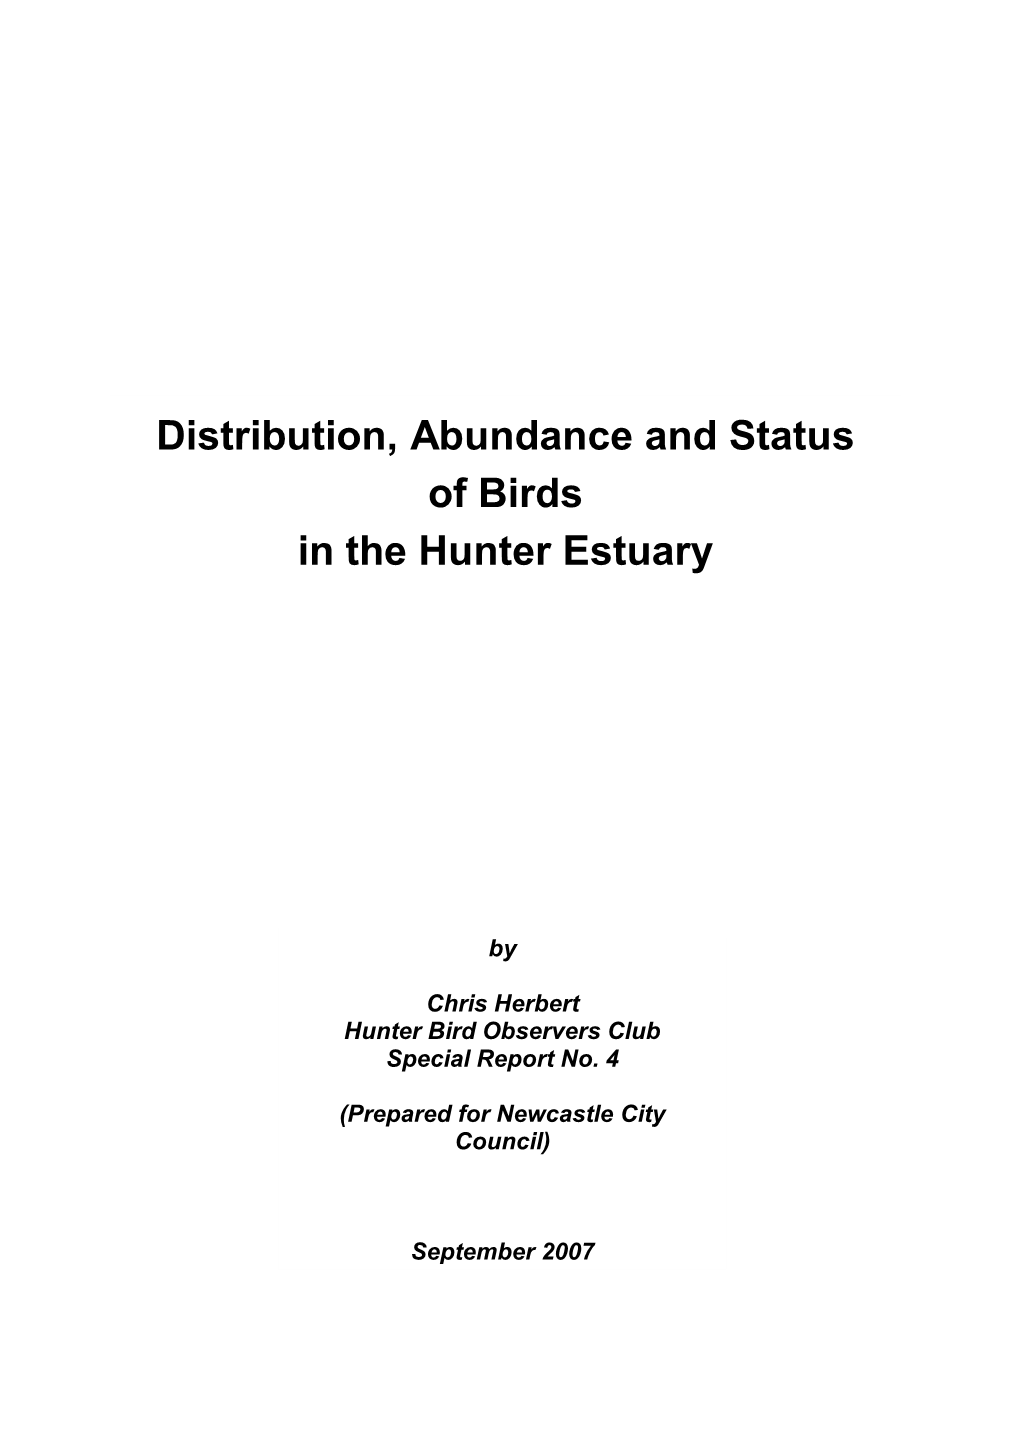 Distribution, Abundance and Status of Birds in the Hunter Estuary I Contents